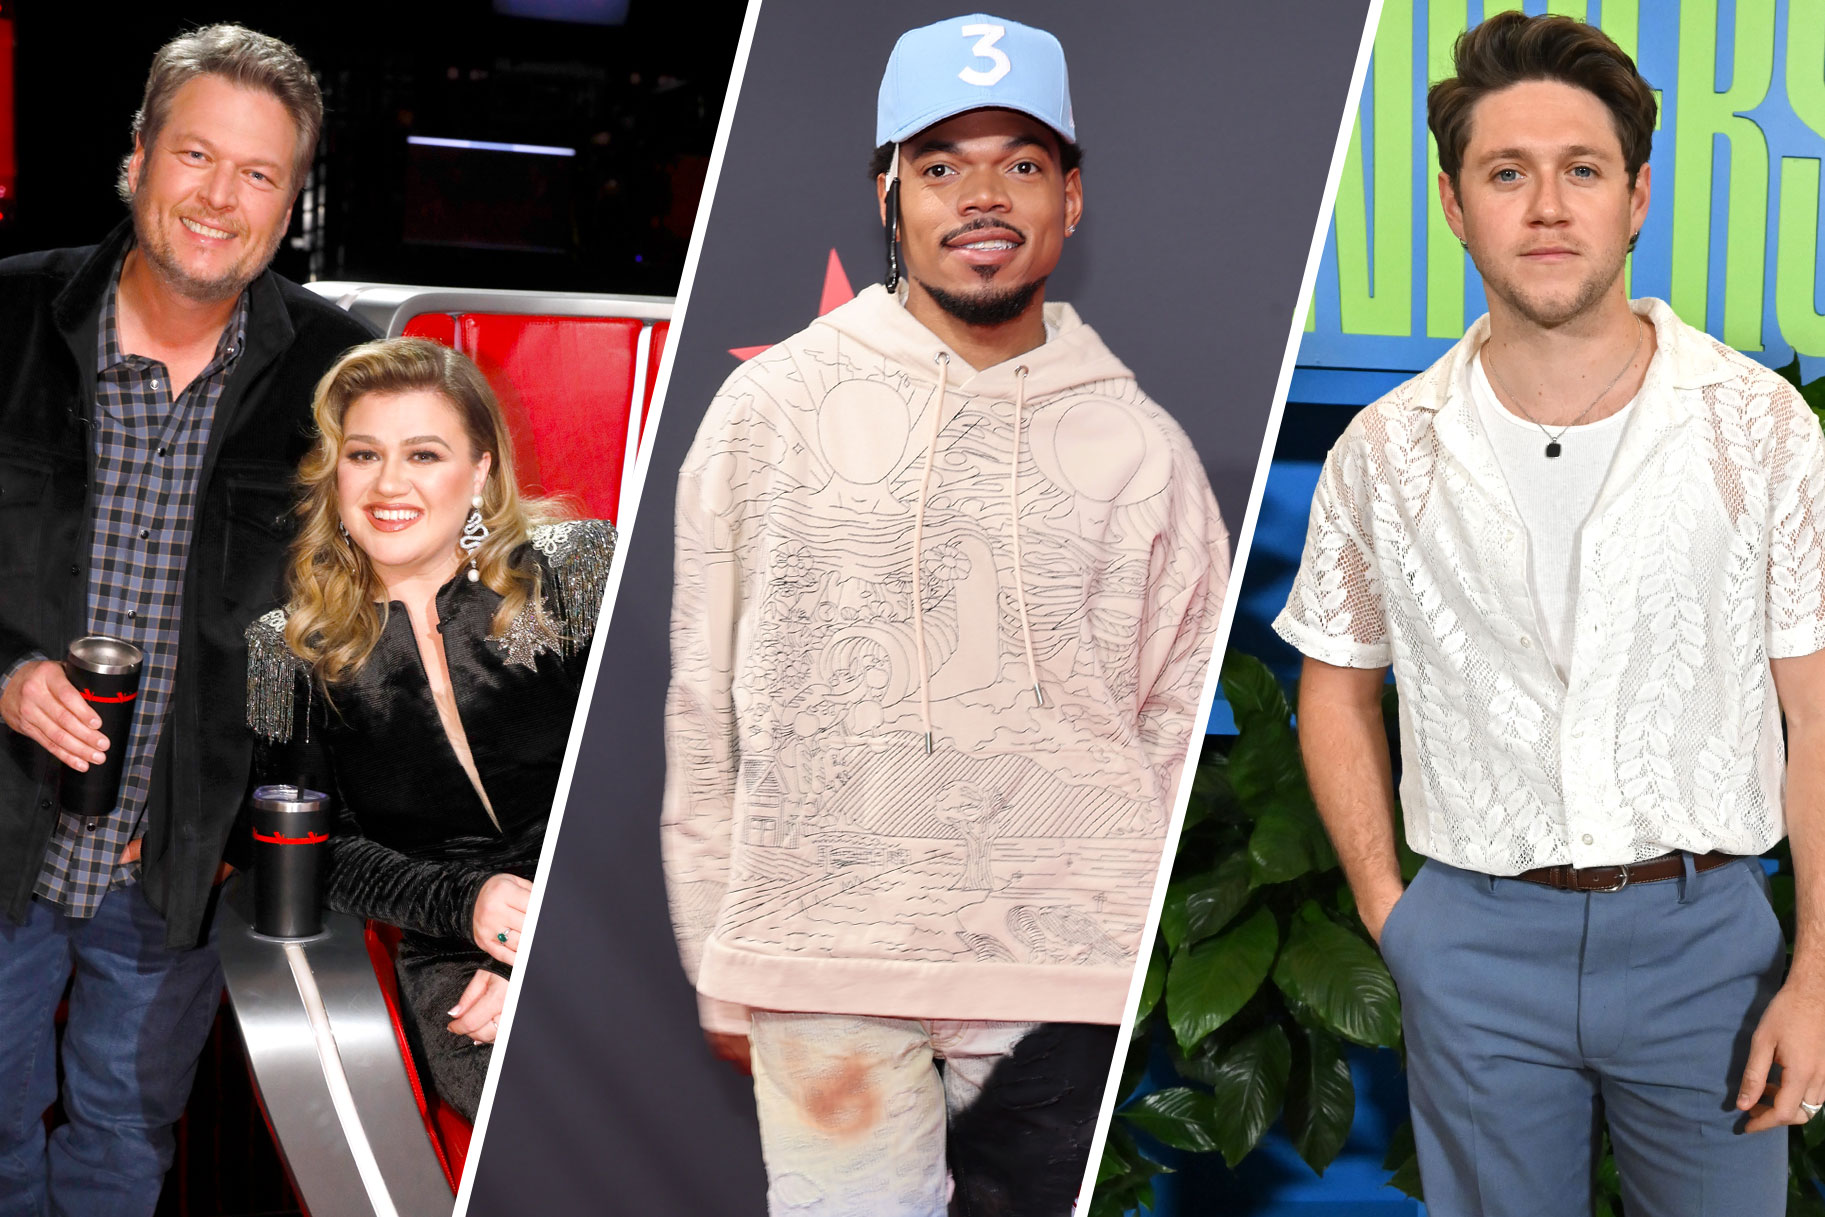 Blake Shelton, Kelly Clarkson, Chance The Rapper and Niall Horan from The Voice